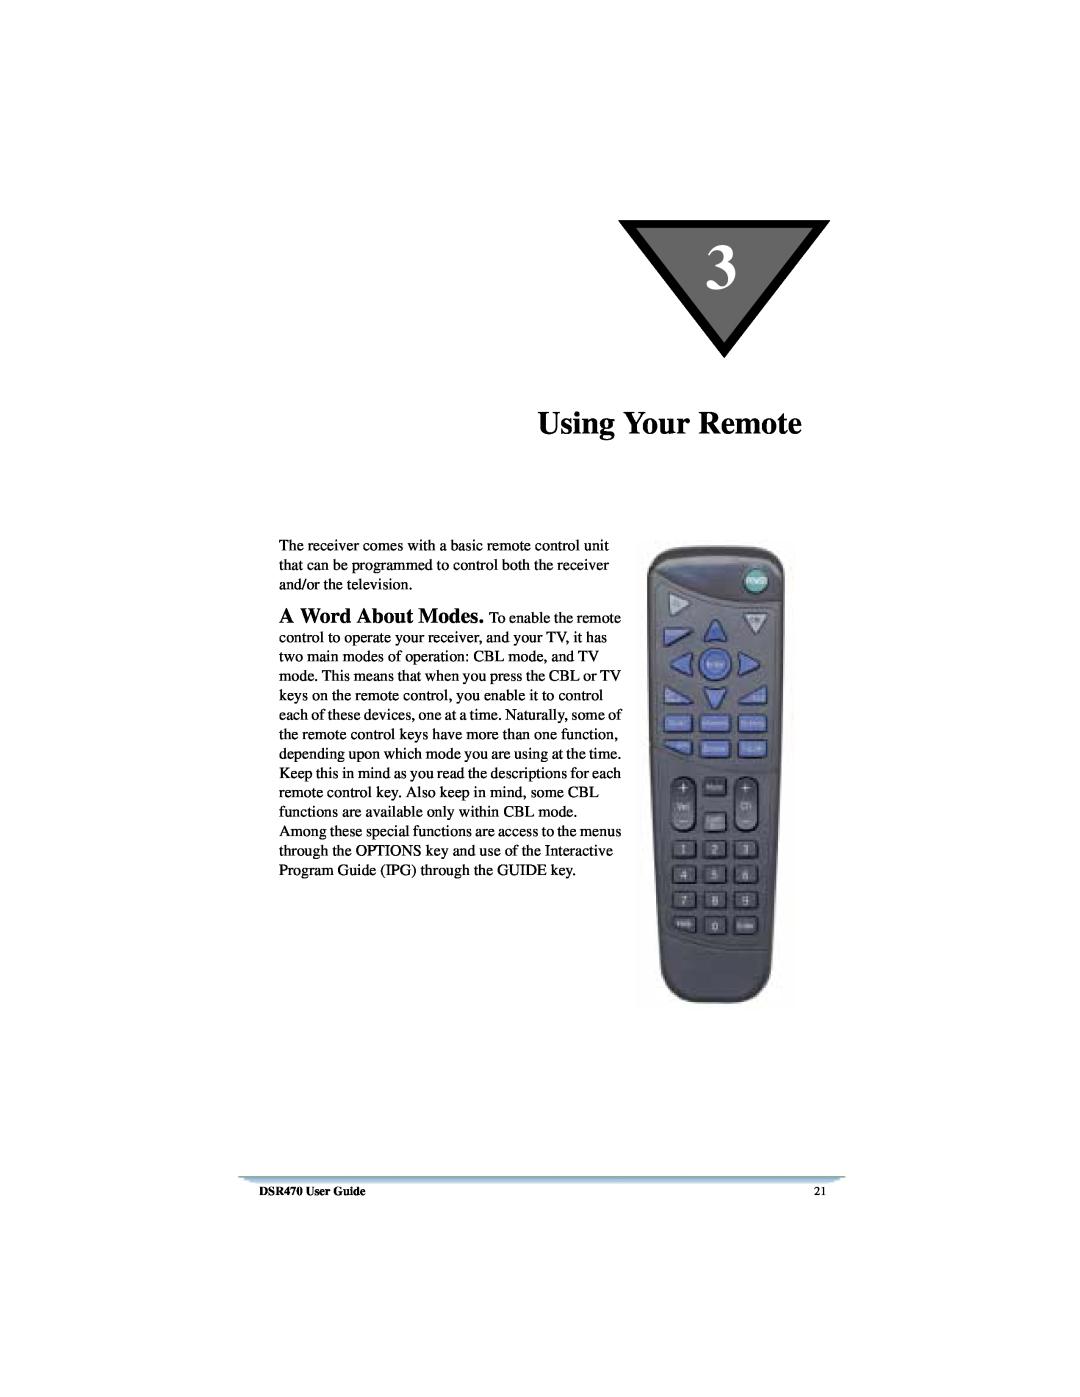 Univex manual Using Your Remote, DSR470 User Guide 